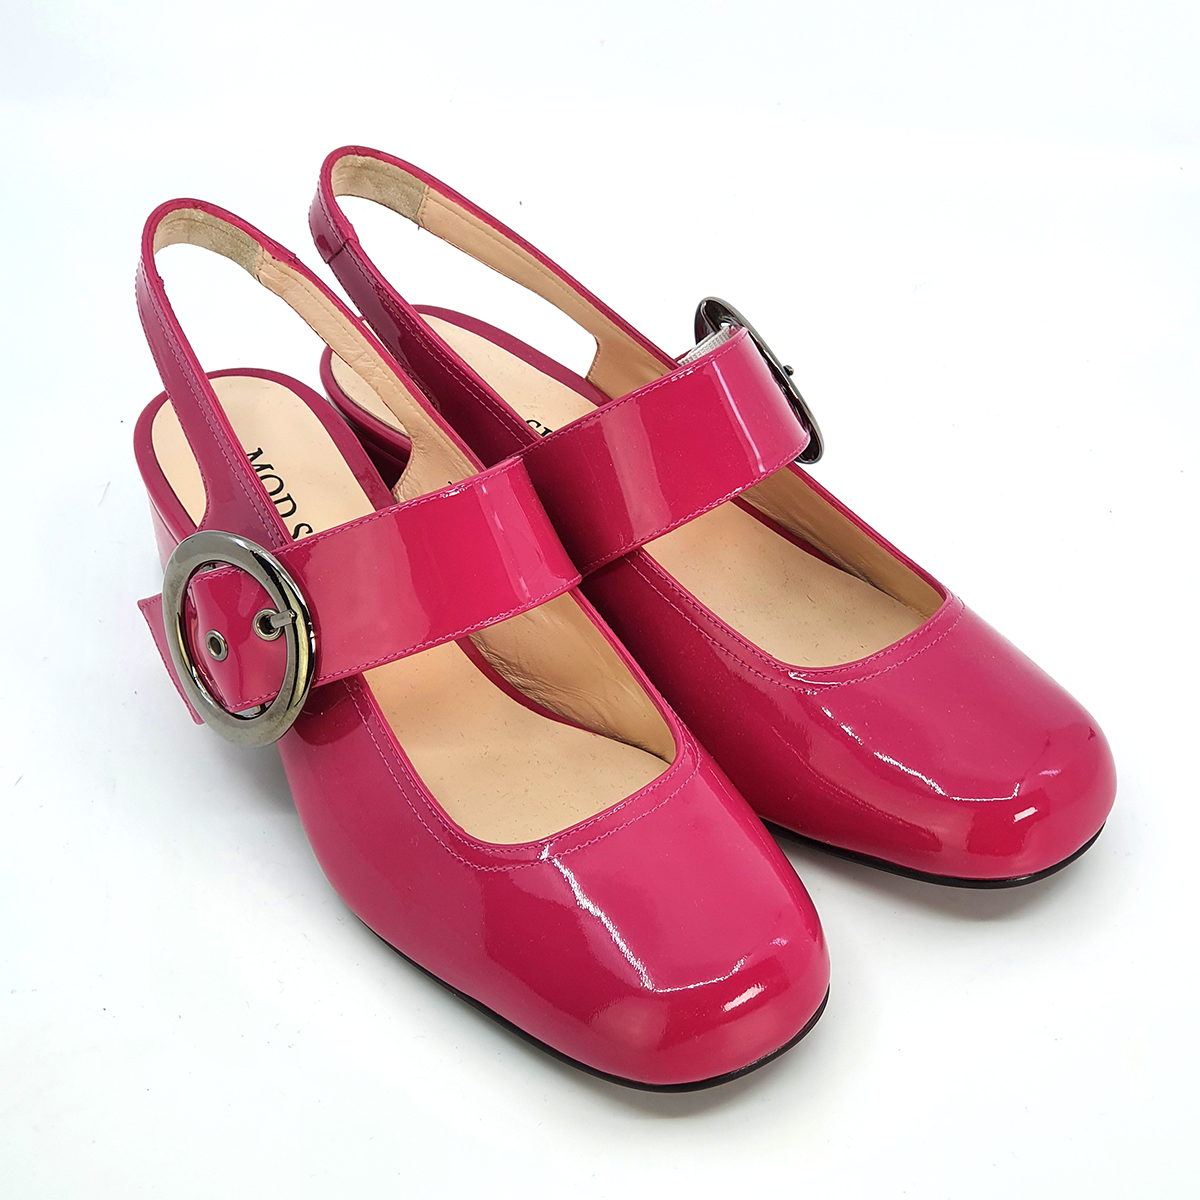 The Lulu In Fuchsia – Ladies Retro 60’s Style by Mod Shoes – Mod Shoes